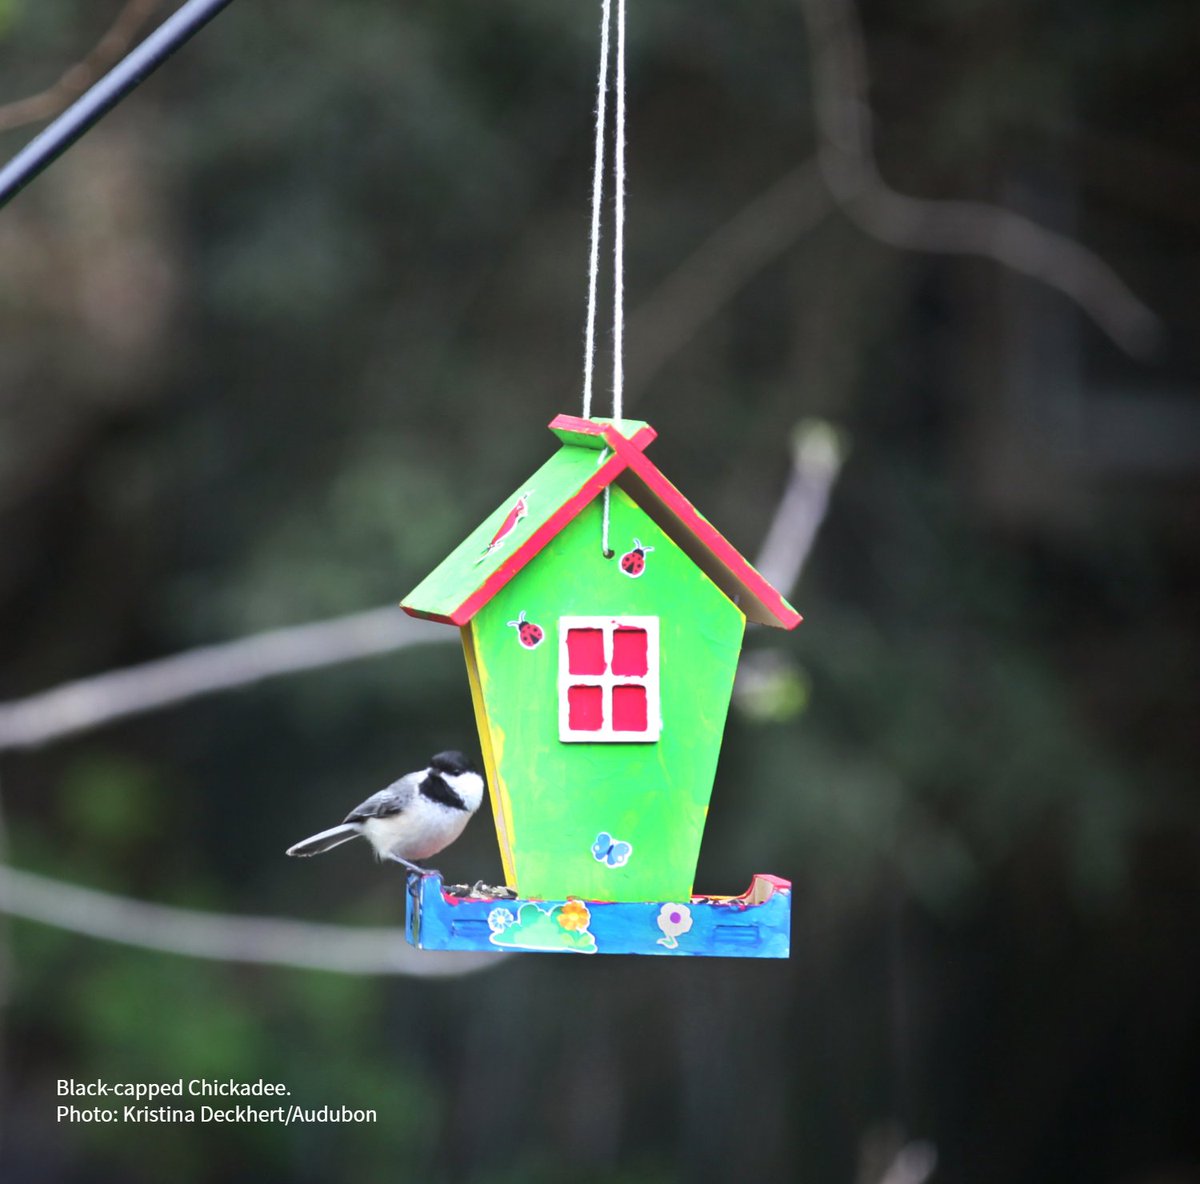 Need a springtime activity to get the next generation excited about birds? Check out our DIY paint kits! A fun, hands-on project for kids—each kit includes project materials like paint & colorful stickers to build & personalize a birdhouse or bird feeder. bit.ly/3Tz9NyW